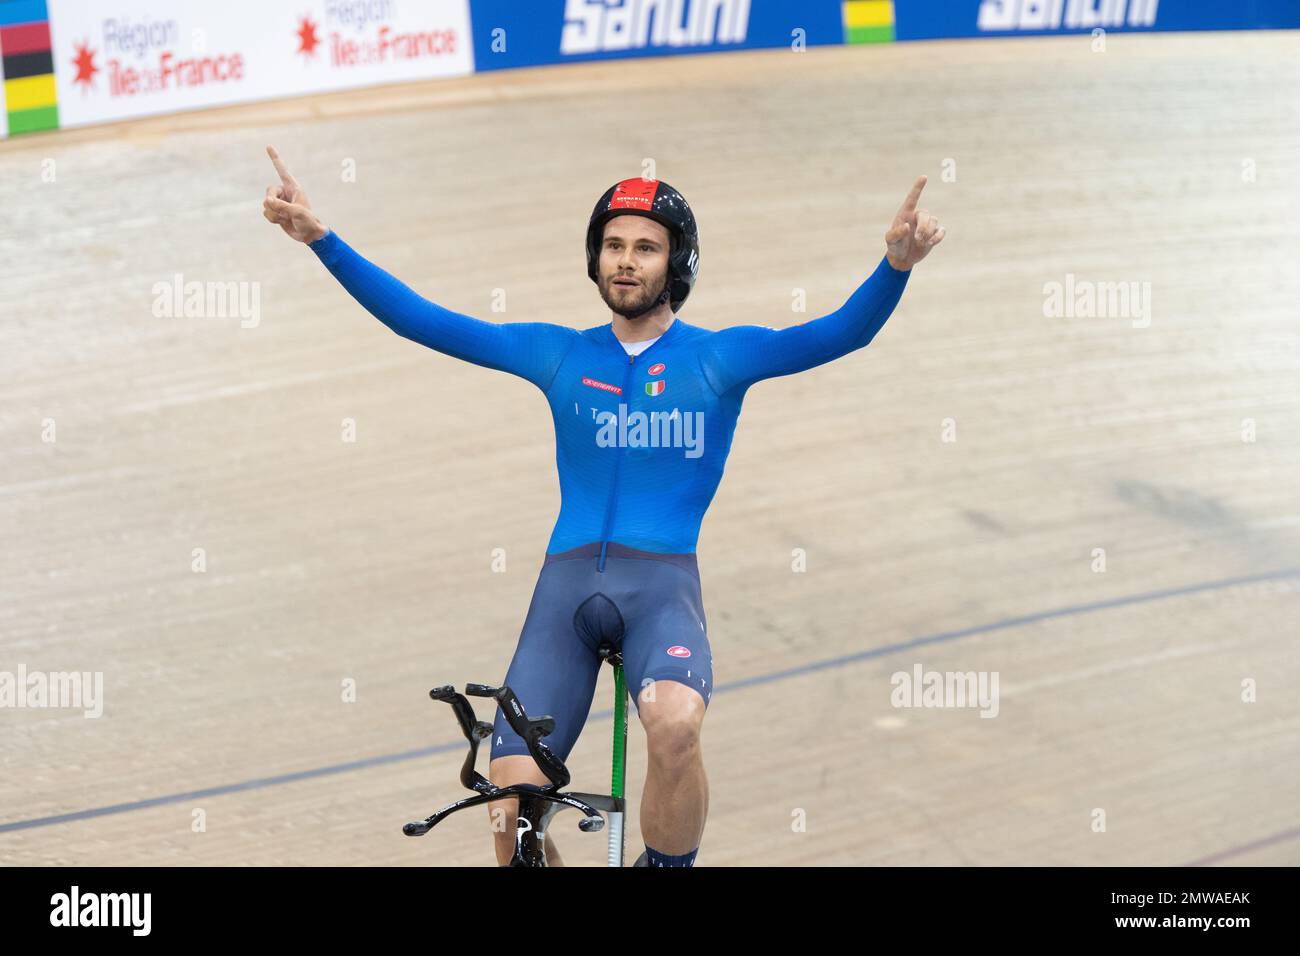 Filippo Ganna of Italy celebrates winning the world championships in the individual pursuit at the 2022 UCI Track Cycling World Championships. Stock Photo